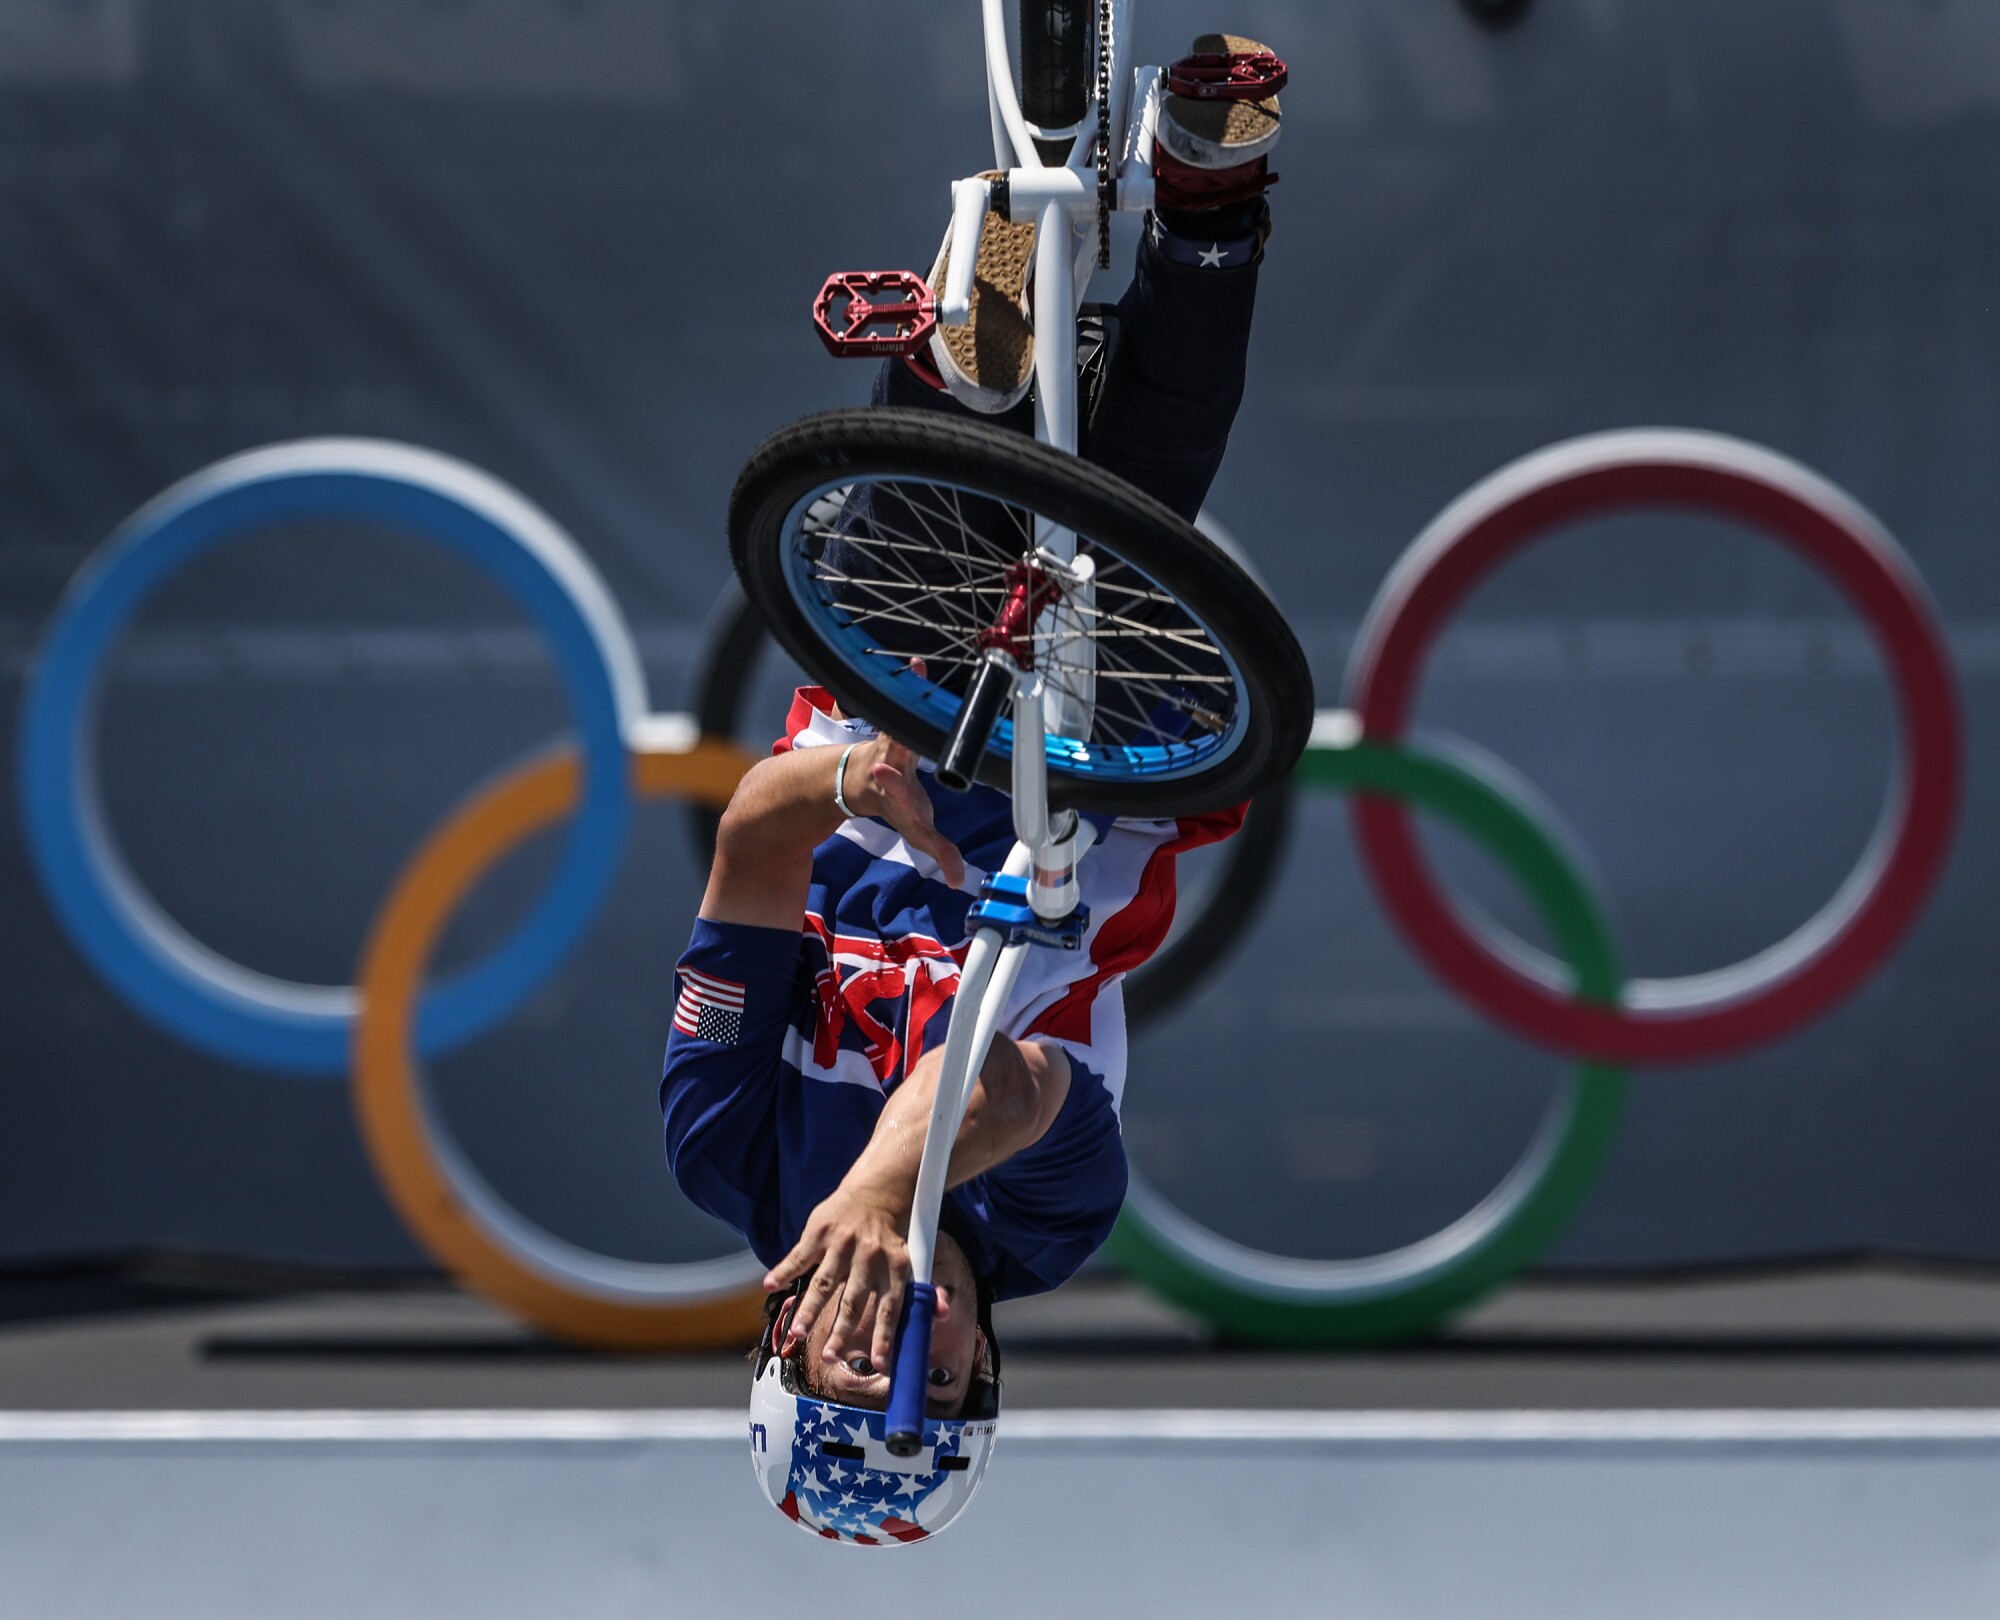 A BMX biker is suspended upside-down as he performs a stunt